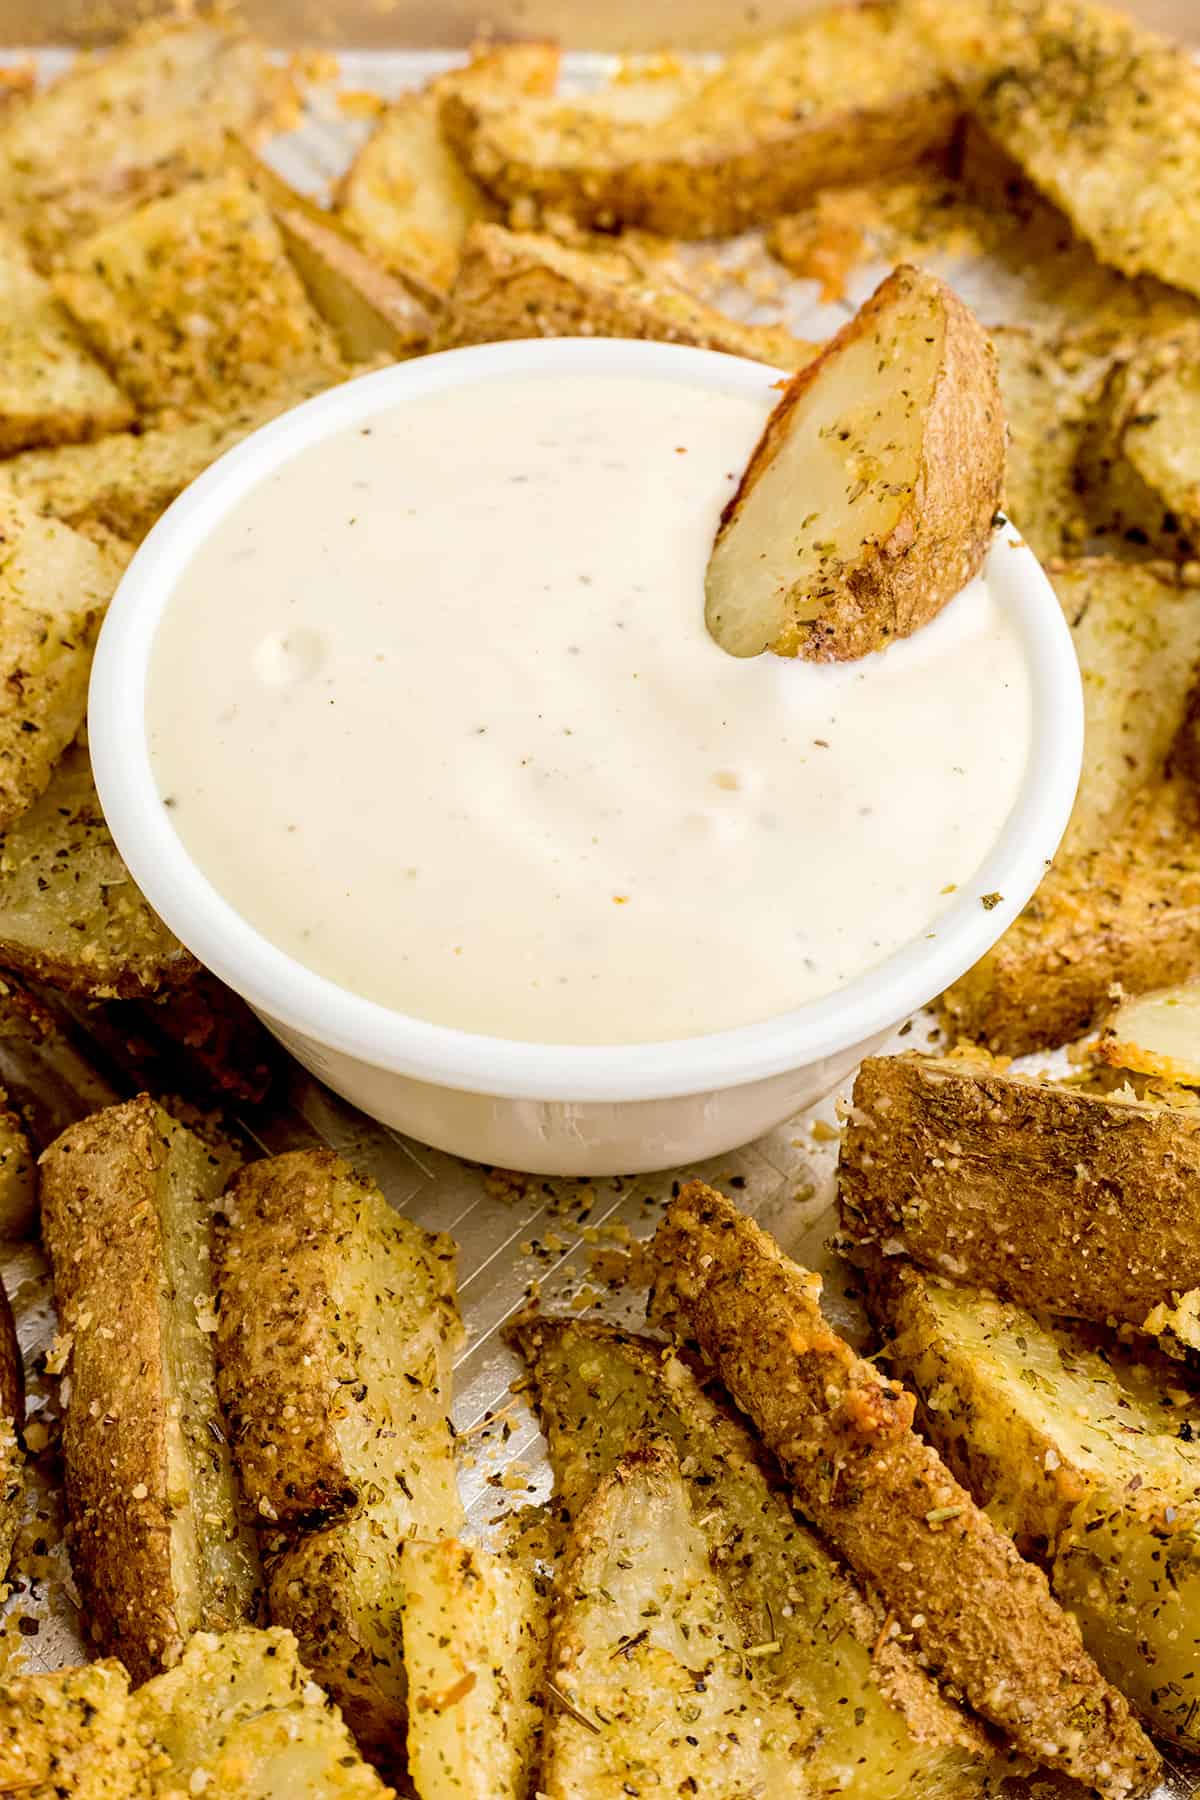 Finished potato wedges on a baking sheet with a bowl of ranch dipping sauce.